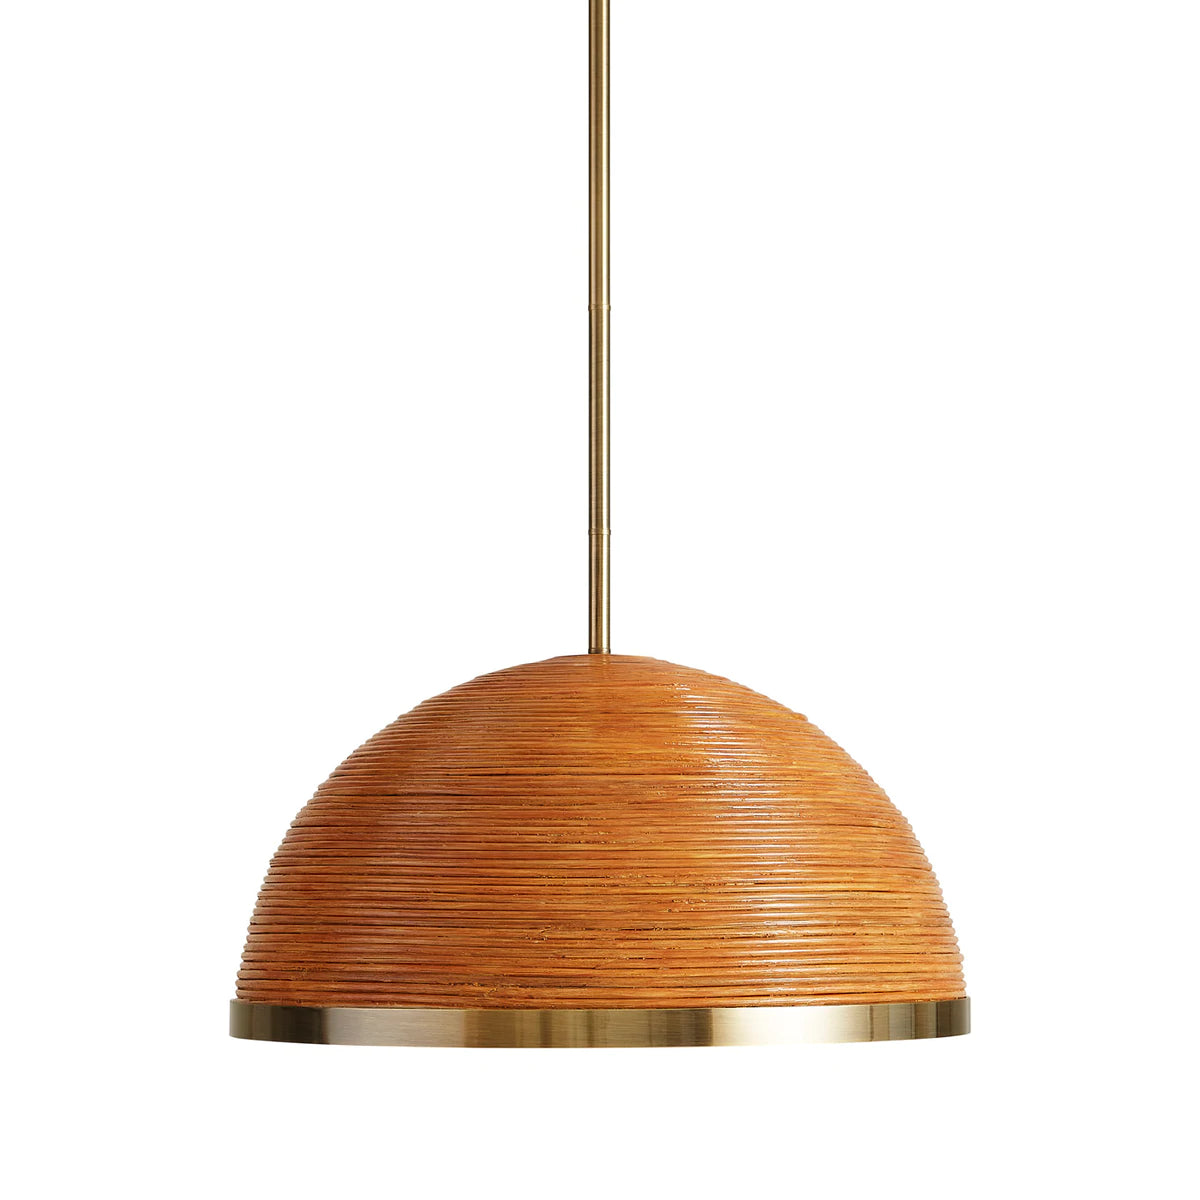 Riviera Small Dome Pendant by Jonathan Adler